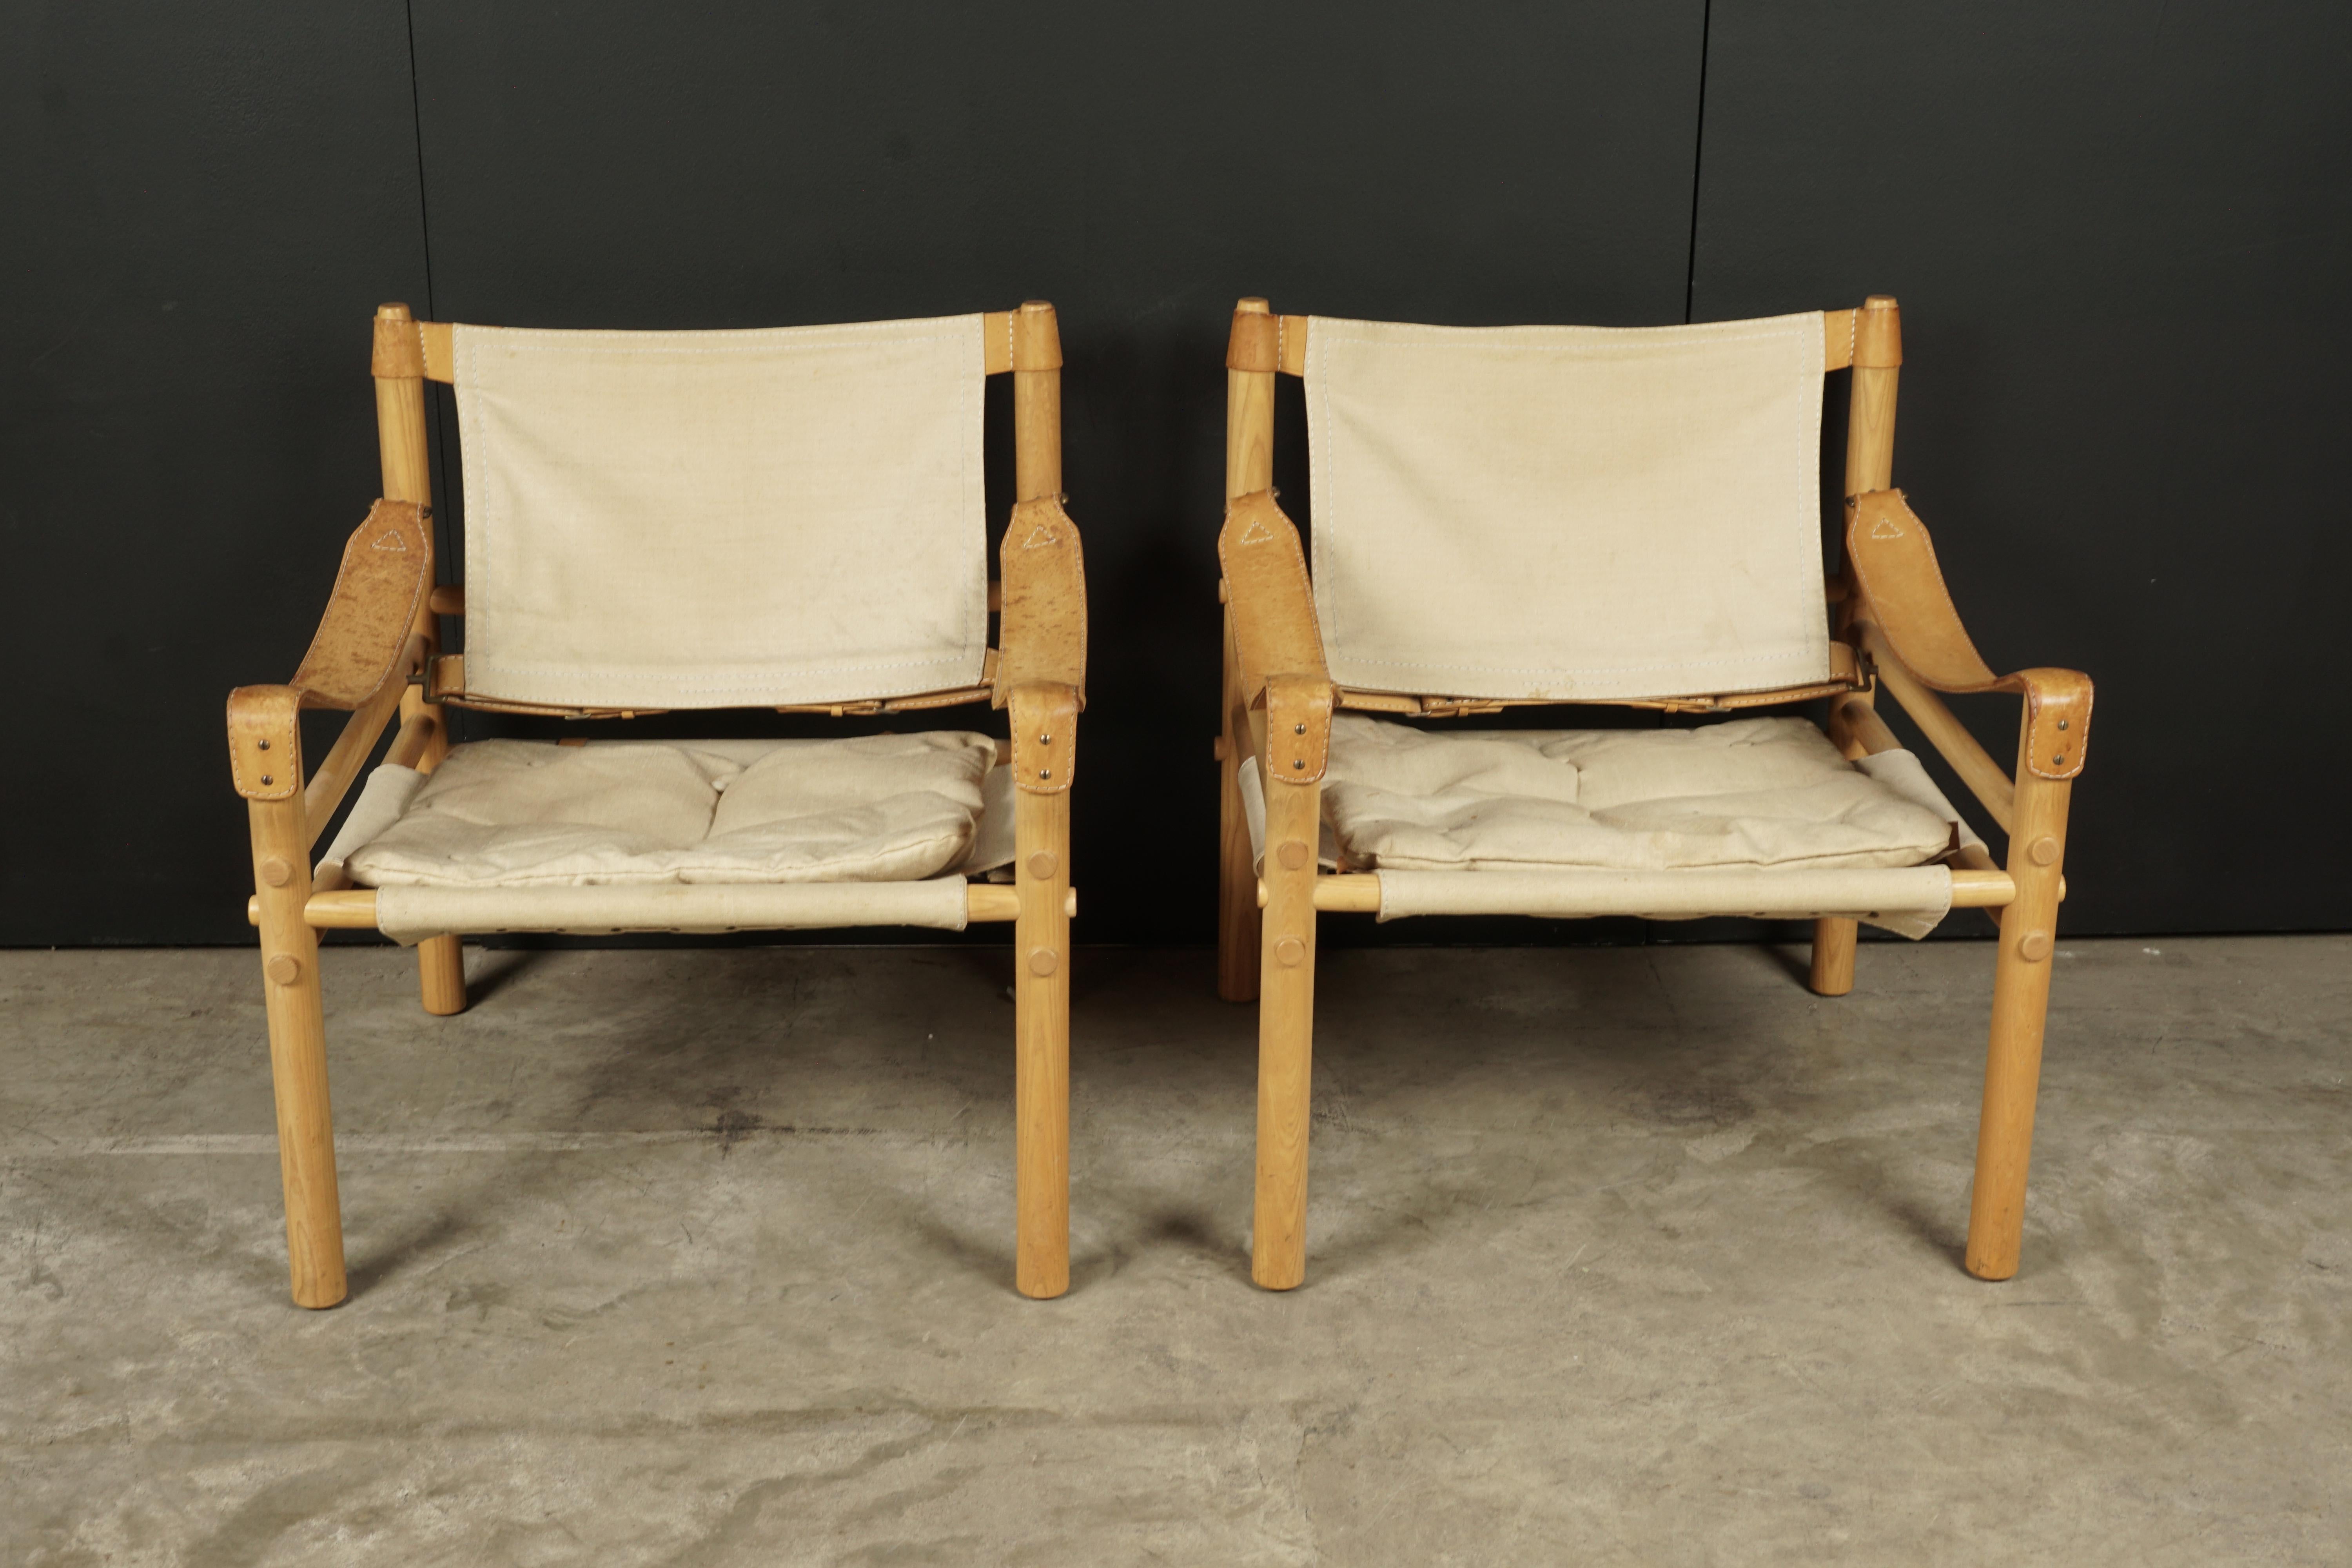 Pair of Arne Norell lounge chairs, Model Sirocco, Sweden, circa 1970. Original canvas upholstery stretched on a solid oak frame. Produced by Arne Norell AB, Aneby Sweden.